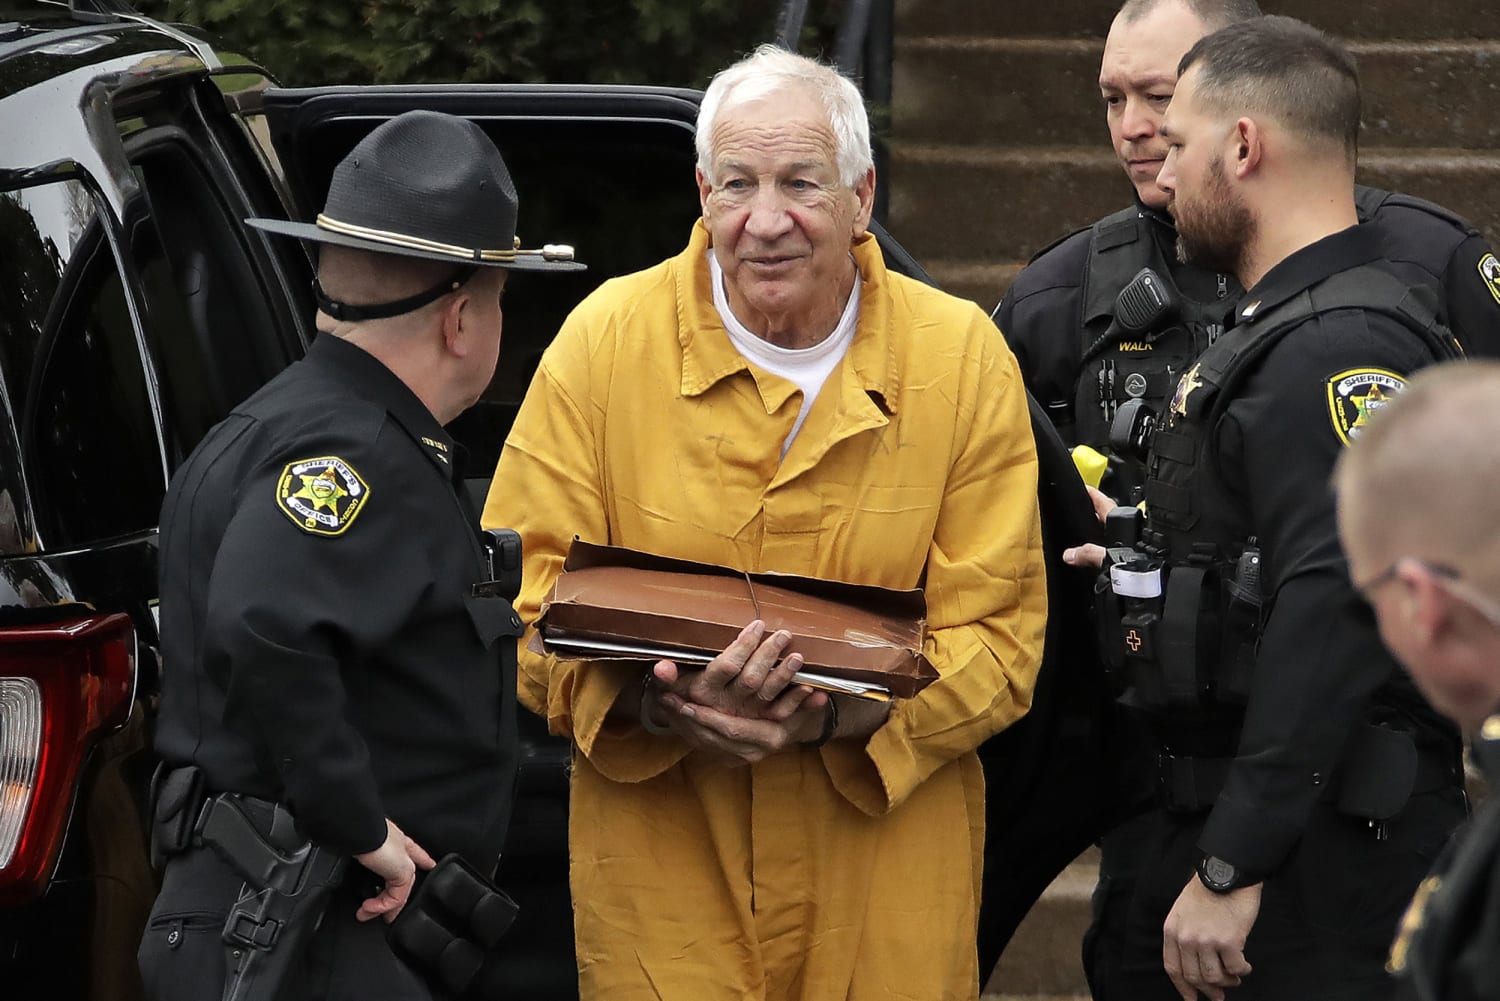 Jerry Sandusky resentenced to 30 to 60 years, same as before